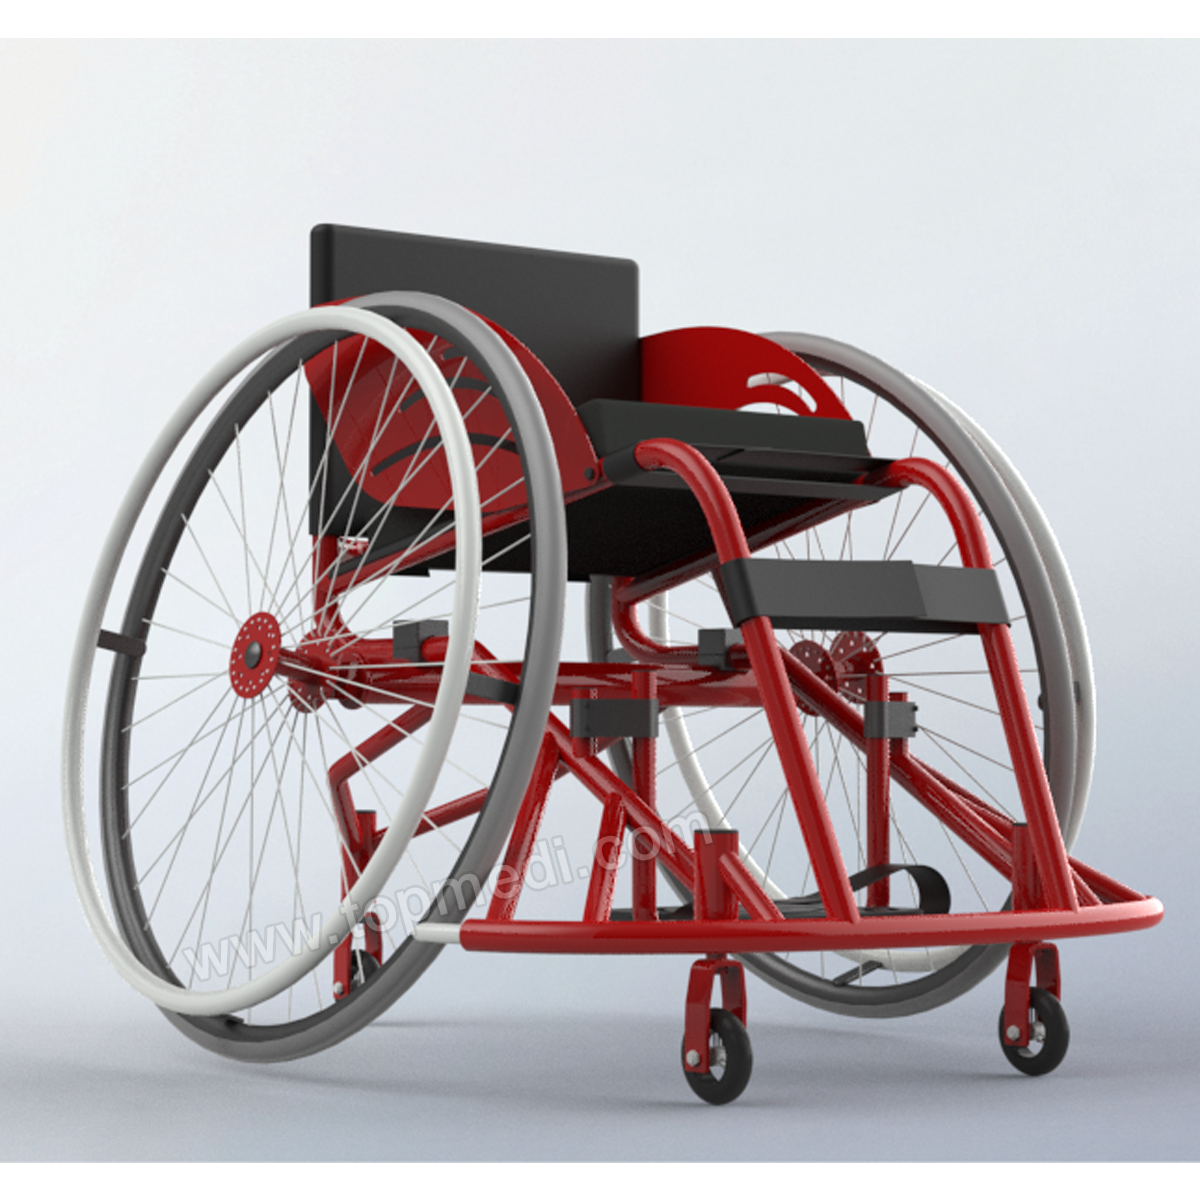 How to maintain and prolong the service life of wheelchairs?